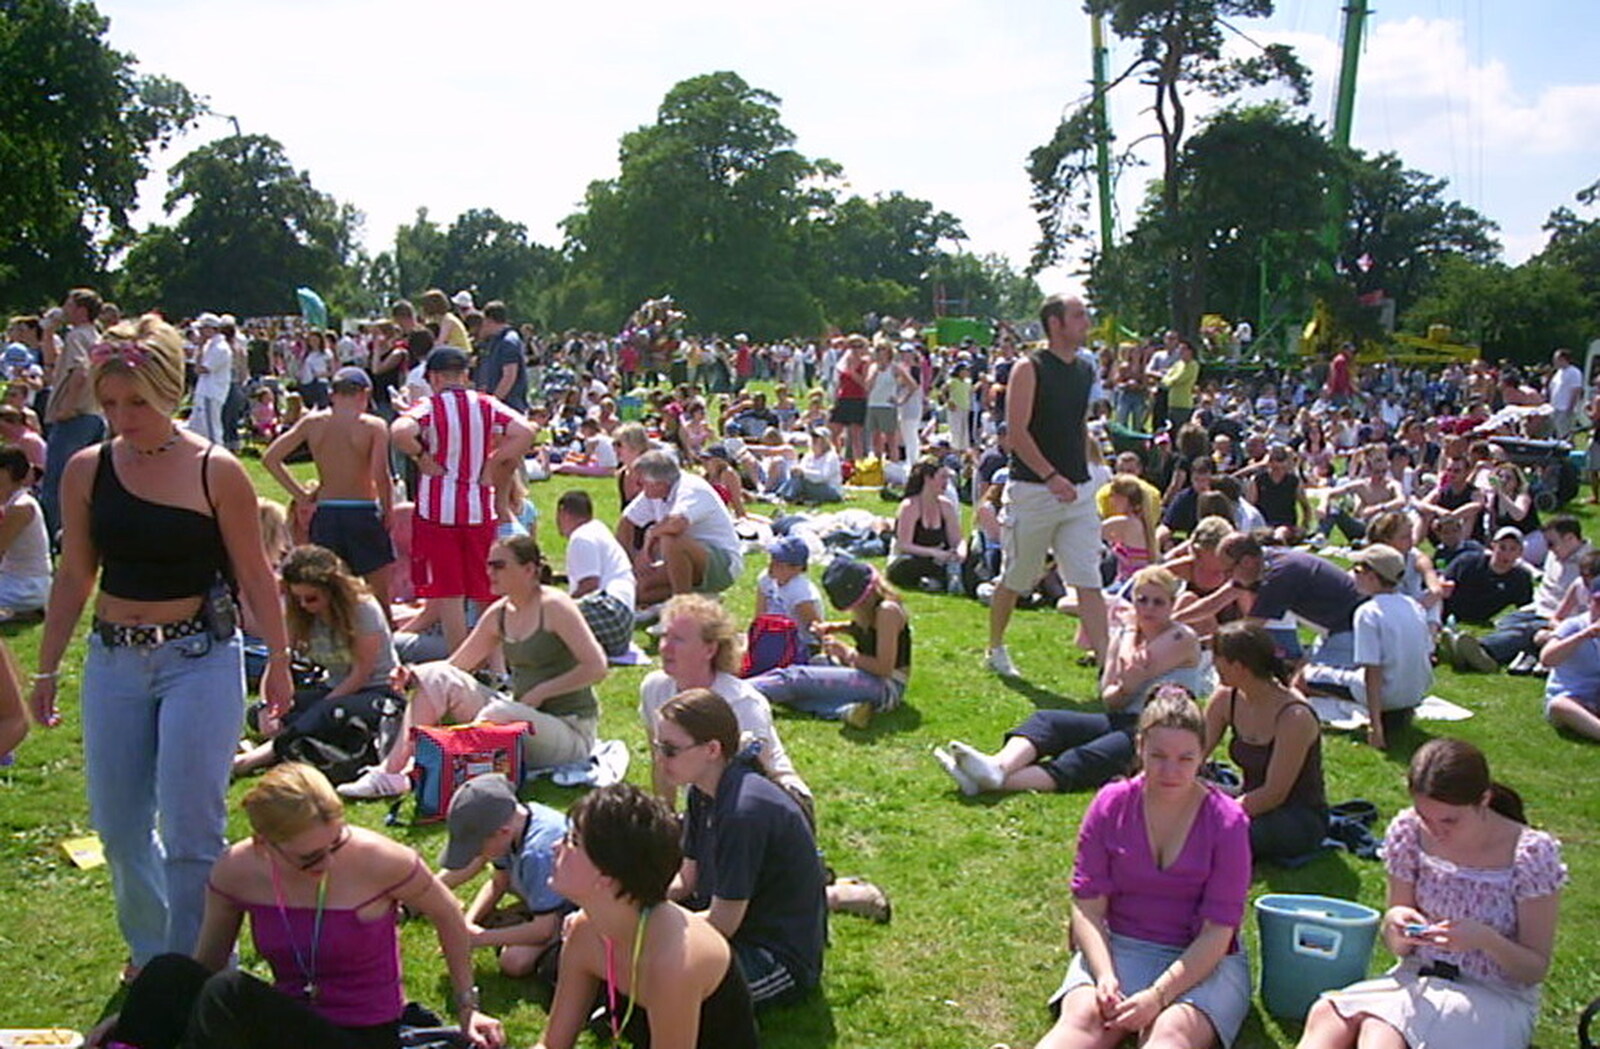 More crowds in the sun from Radio 1's One Big Sunday, Chantry Park, Ipswich - 14th July 2002